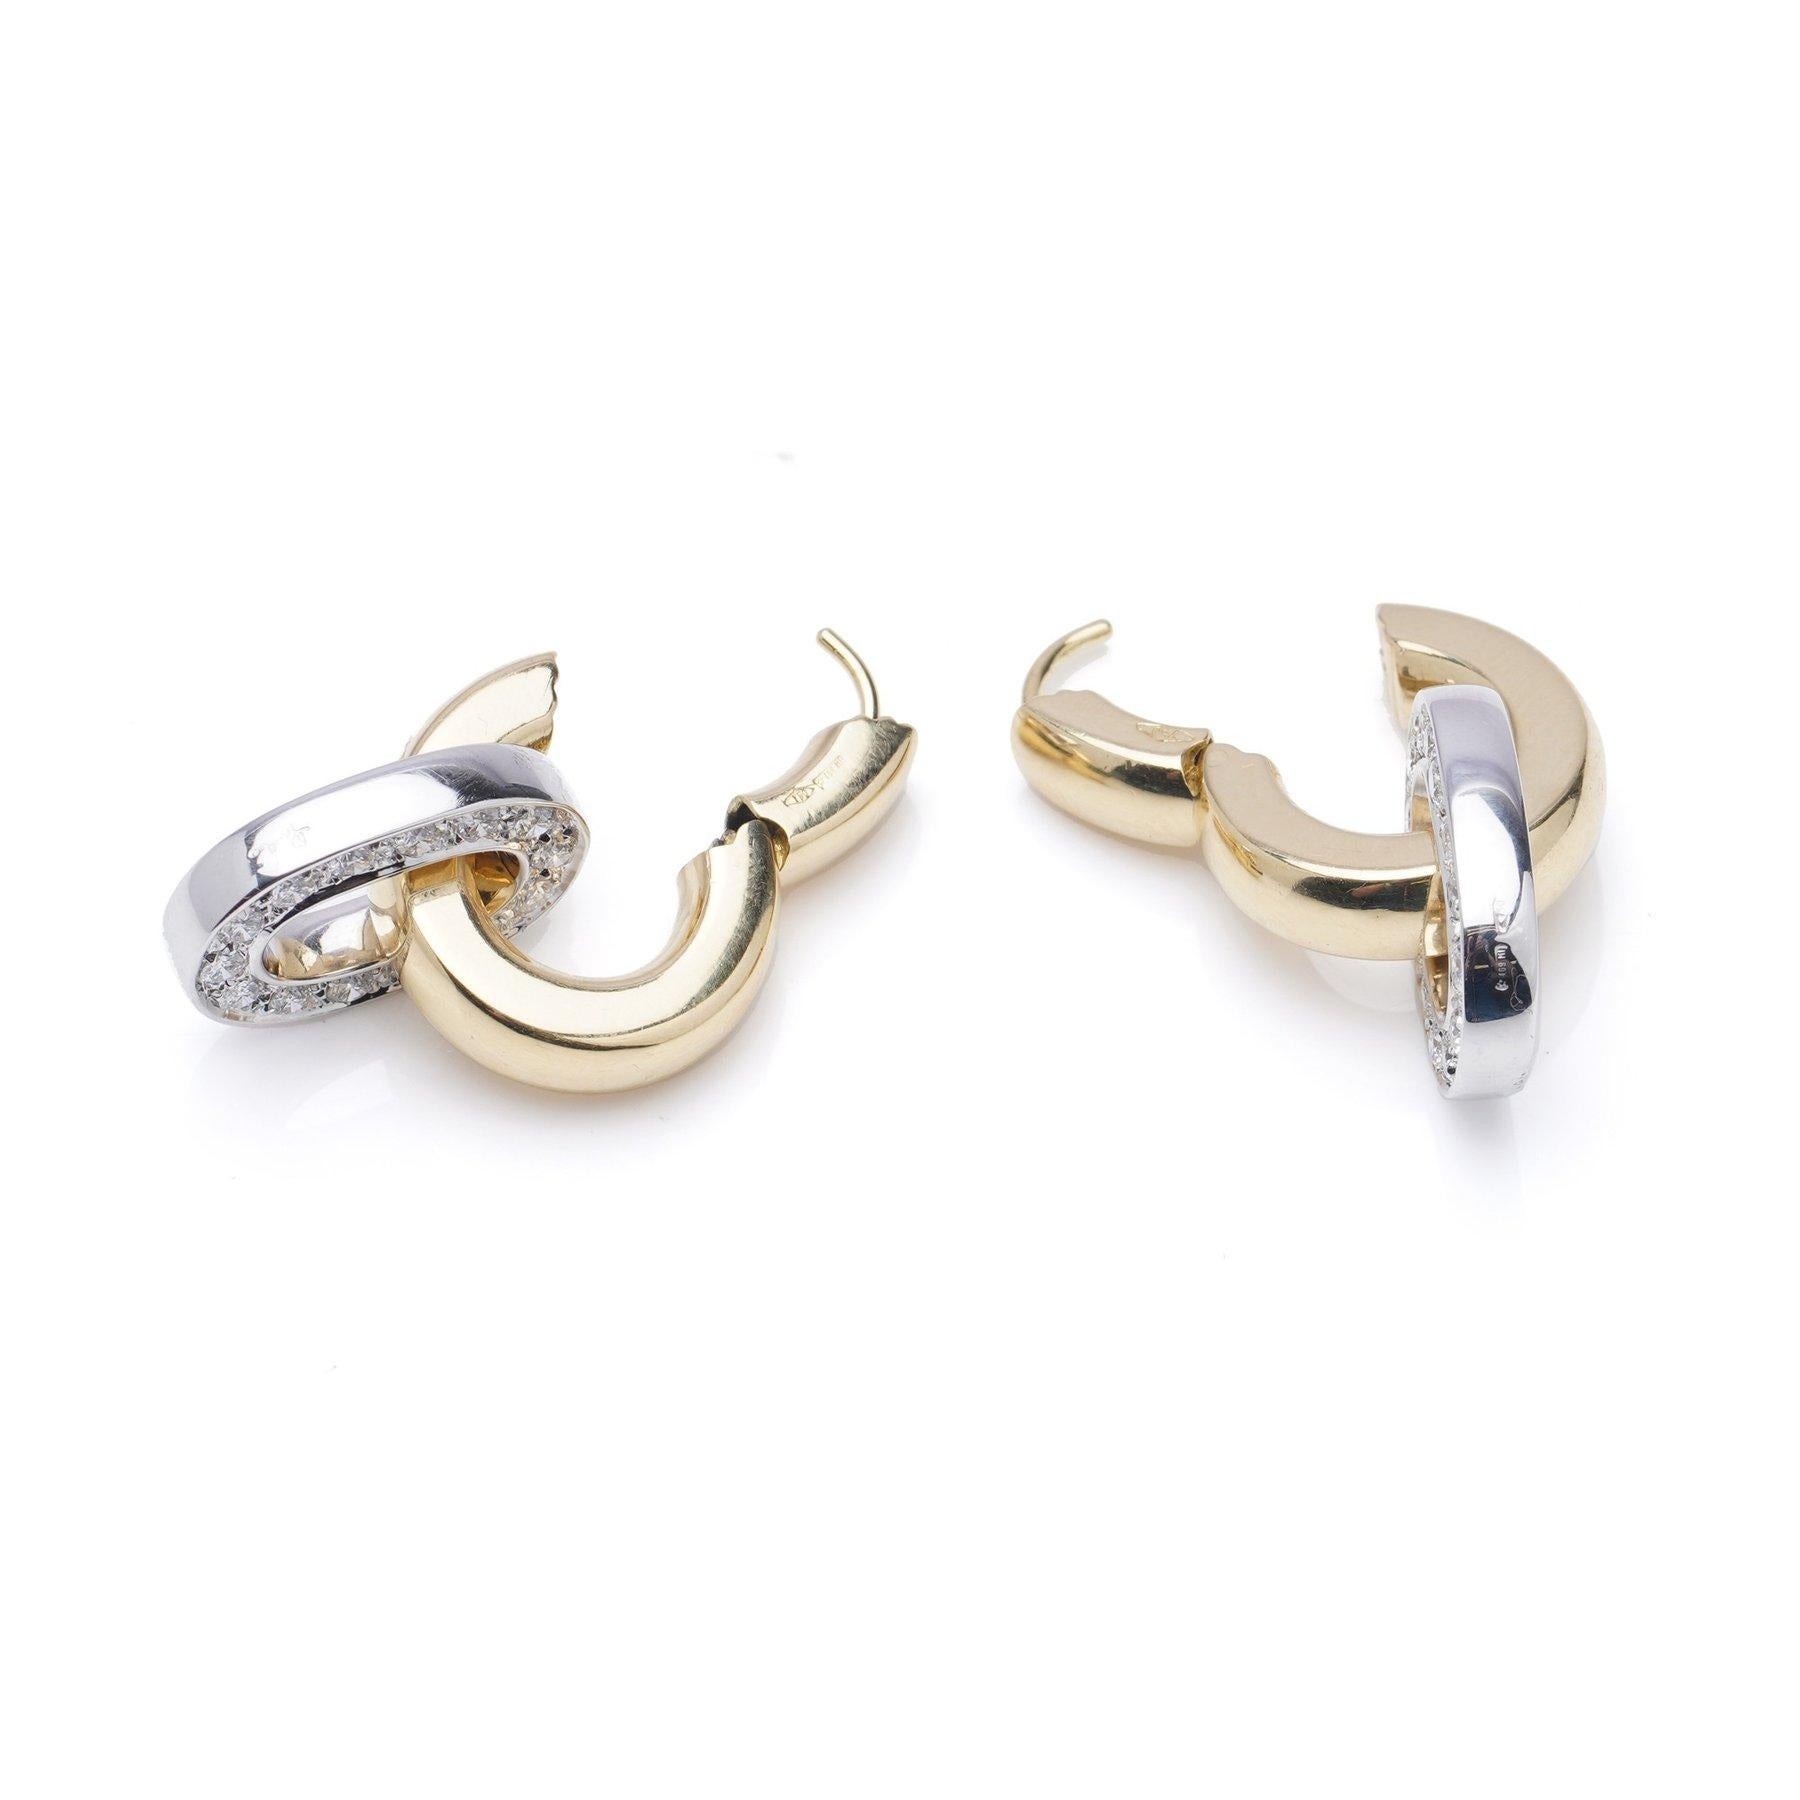 Brilliant Cut Pomellato 18kt yellow and white gold hoop earrings with 1.50 cts. diamonds